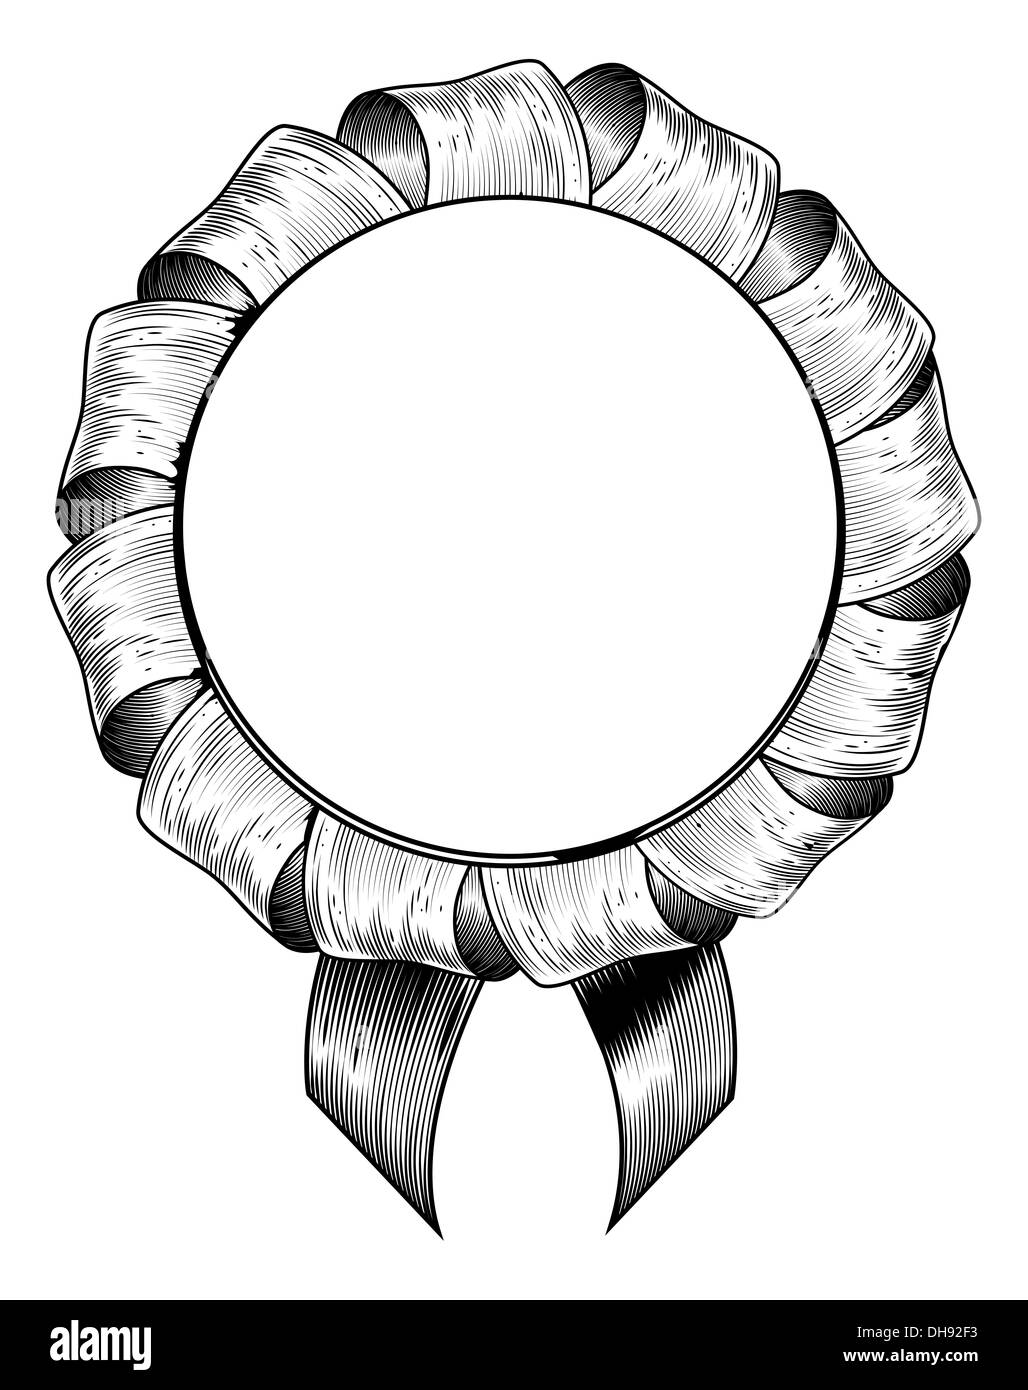 An illustration of a vintage woodcut style rosette Stock Photo